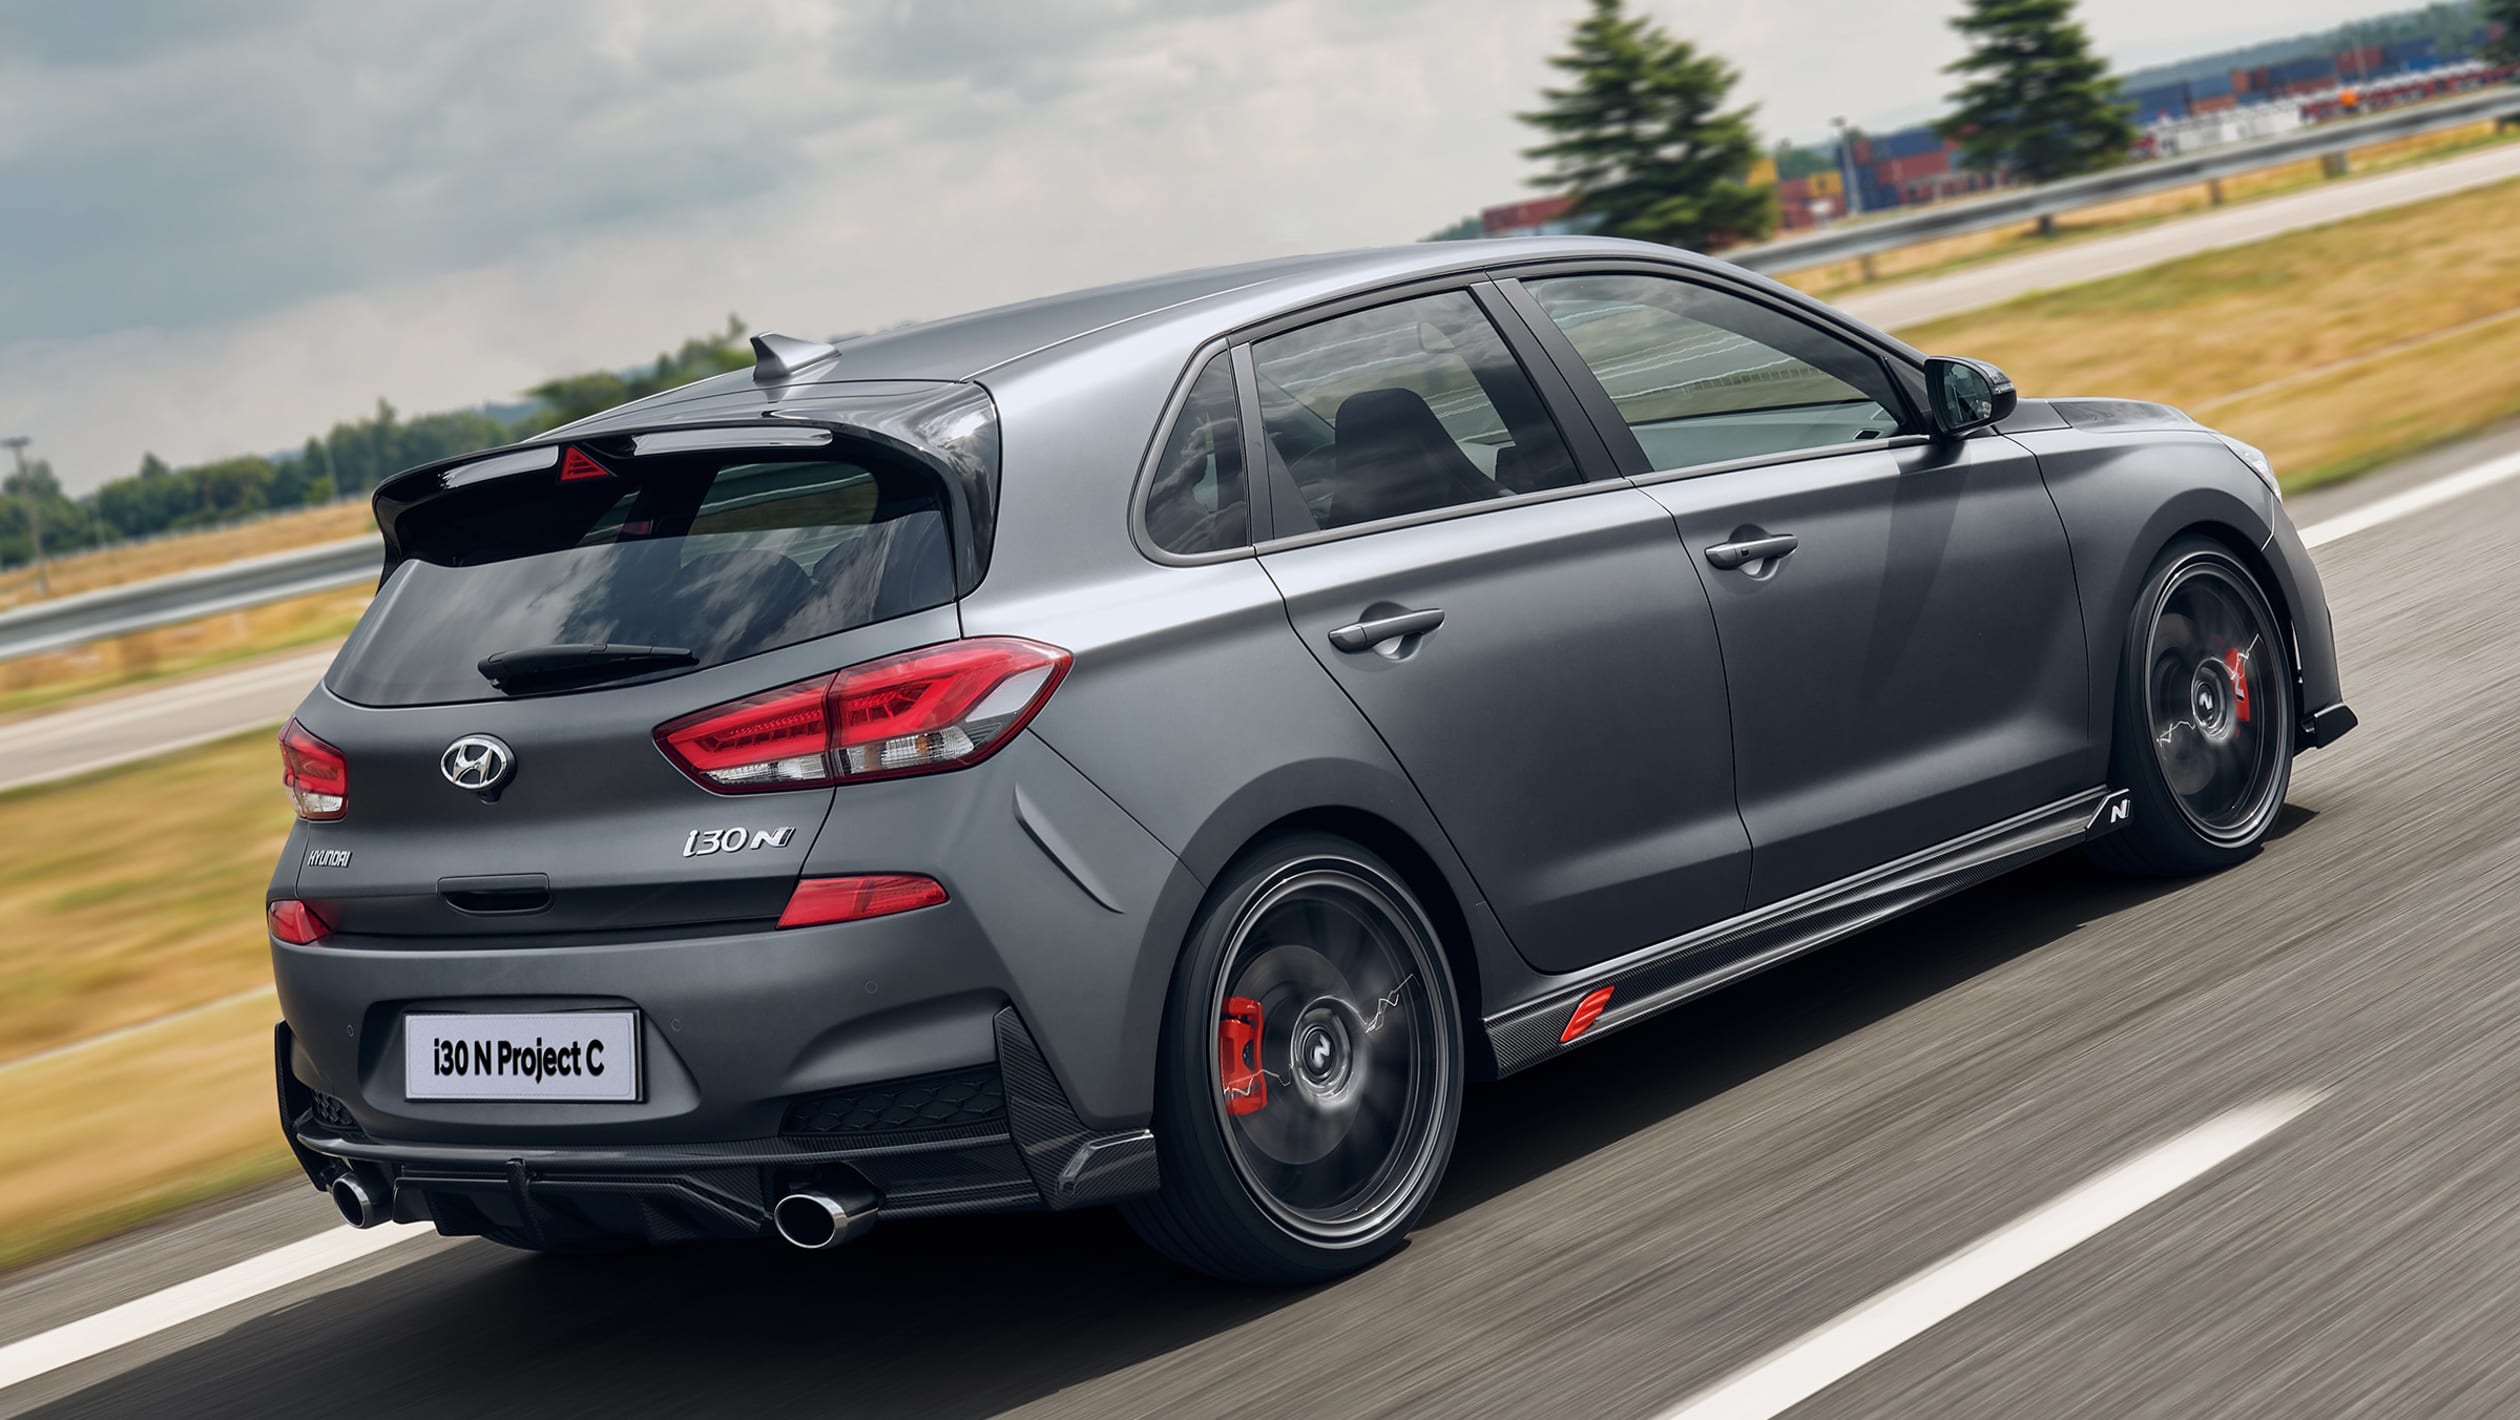 Limited edition Hyundai i30 N Project C launched - pictures | Auto Express